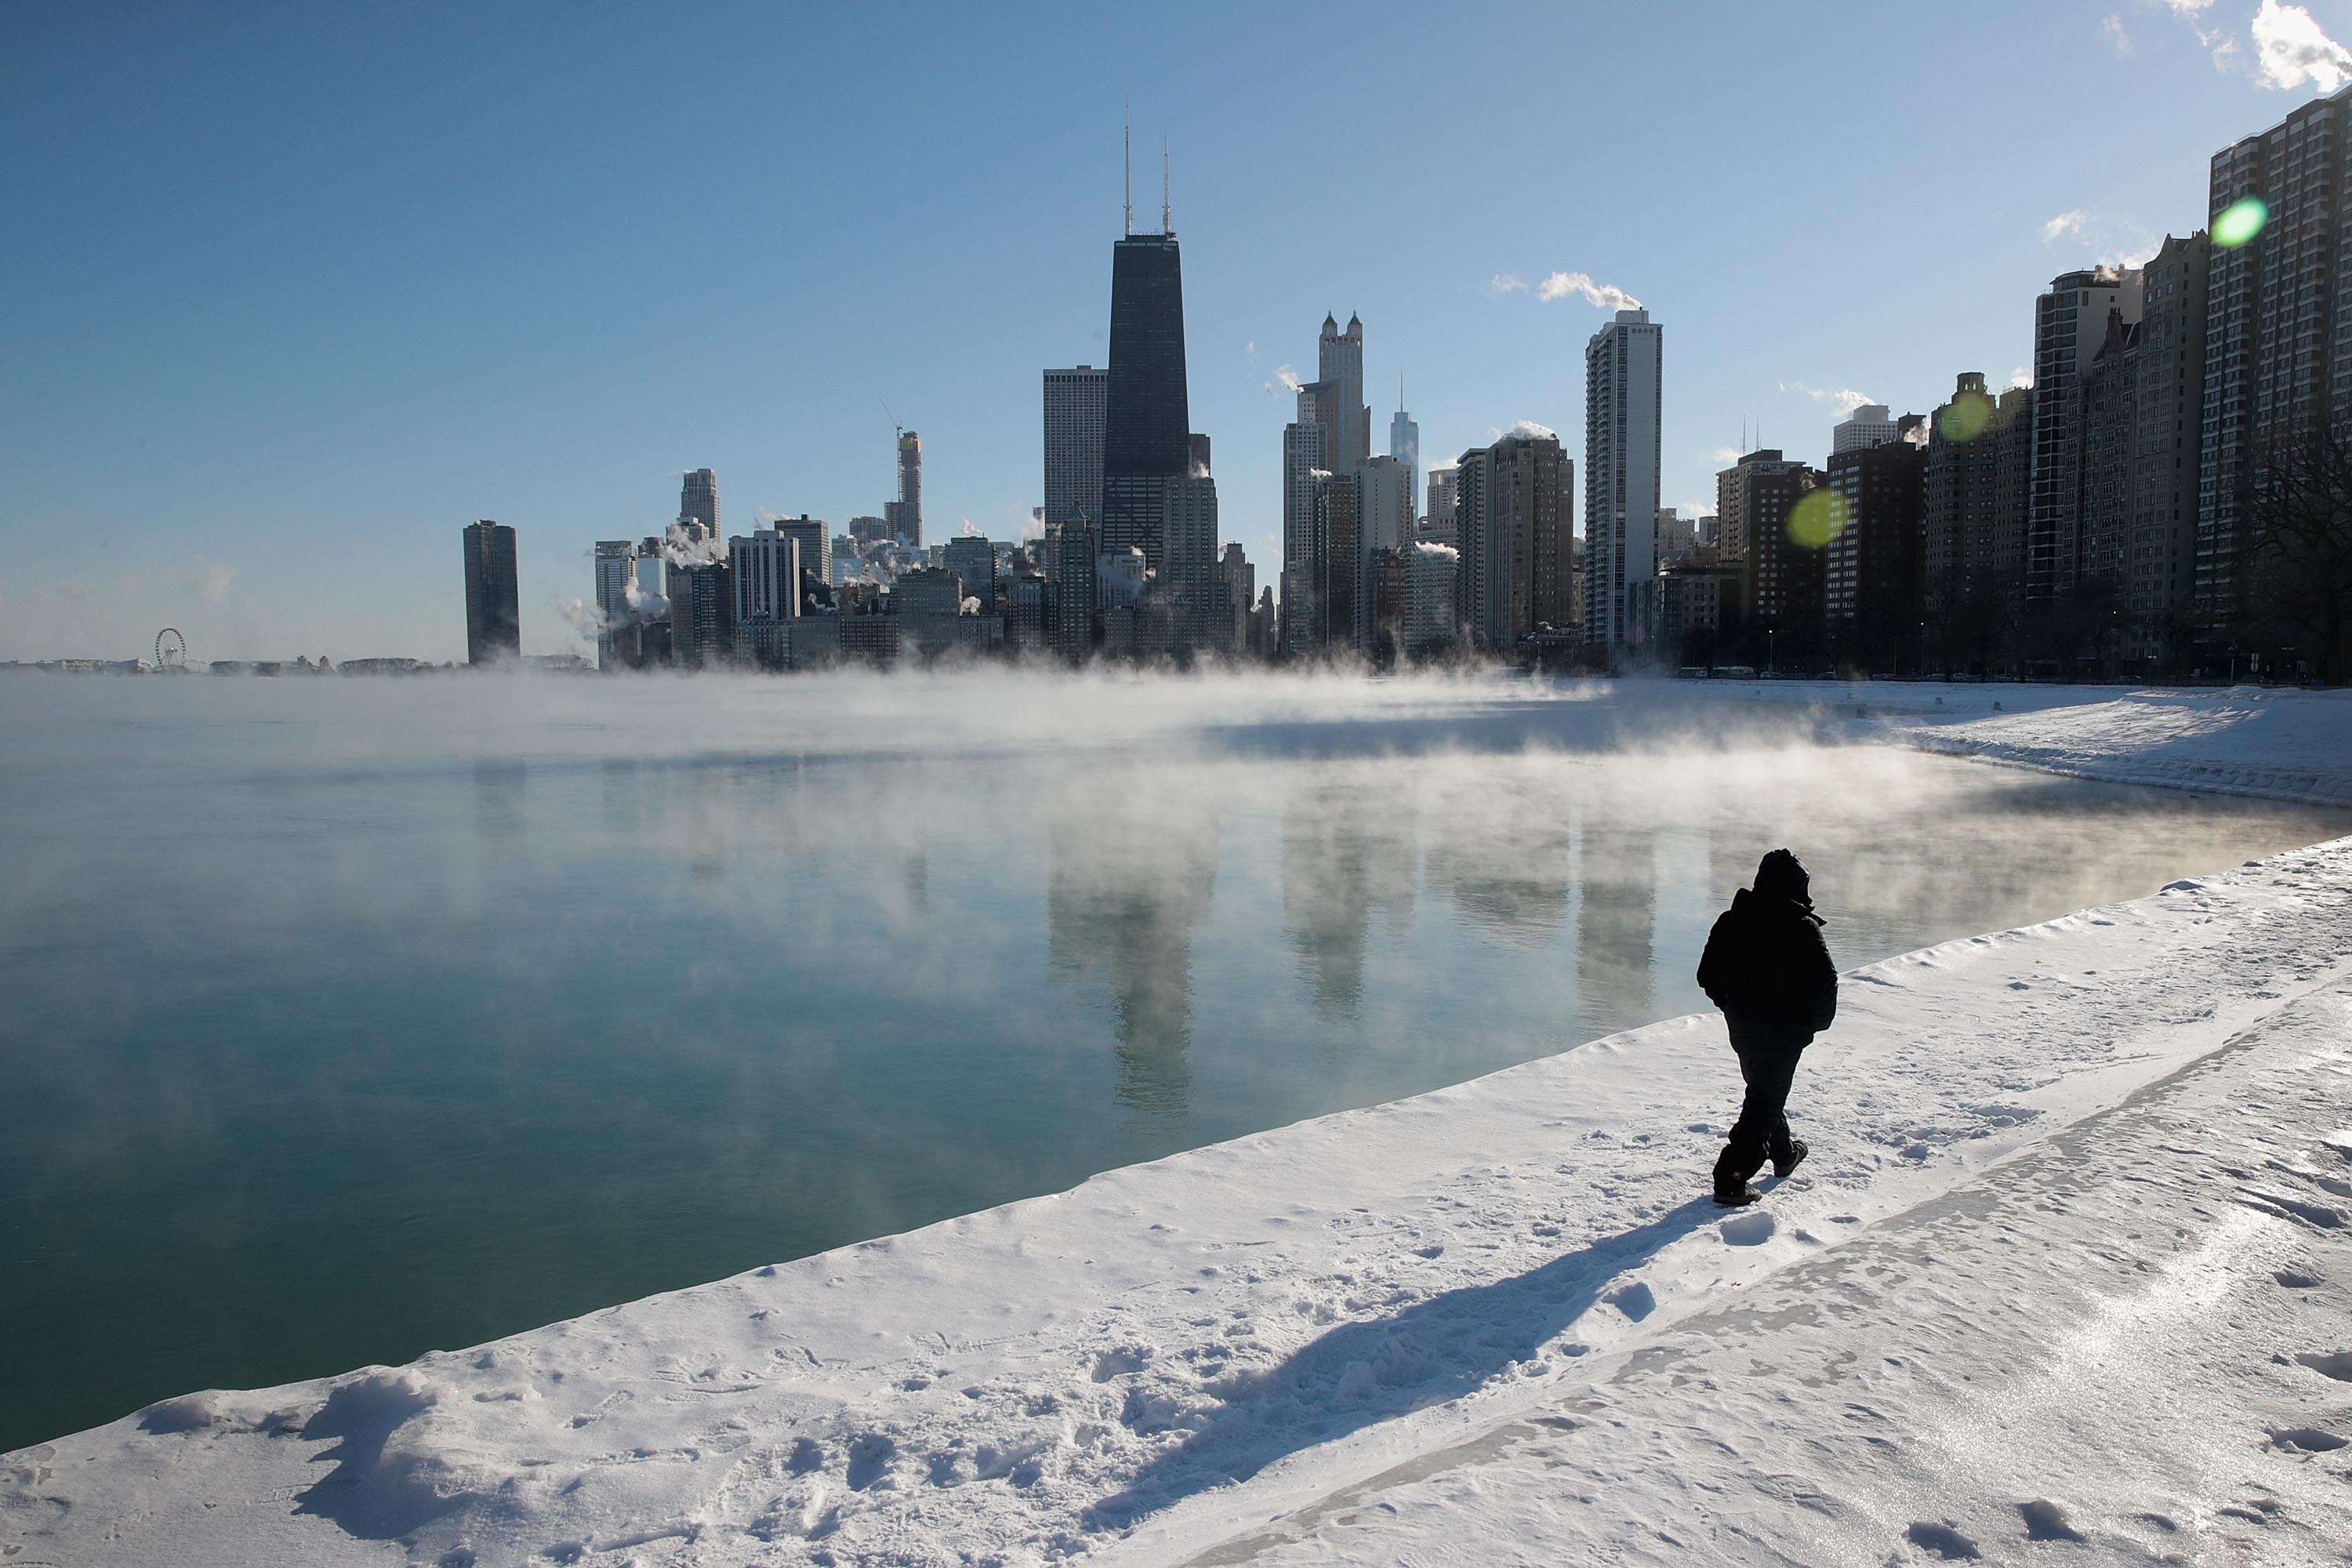 A man takes a walk along the city's lakefront as temperature hung around -20 degrees in Chicago, Illinois. Businesses and schools have closed, Amtrak has suspended service into the city, more than a thousand flights have been cancelled and mail delivery has been suspended as the city copes with record-setting low temperatures.